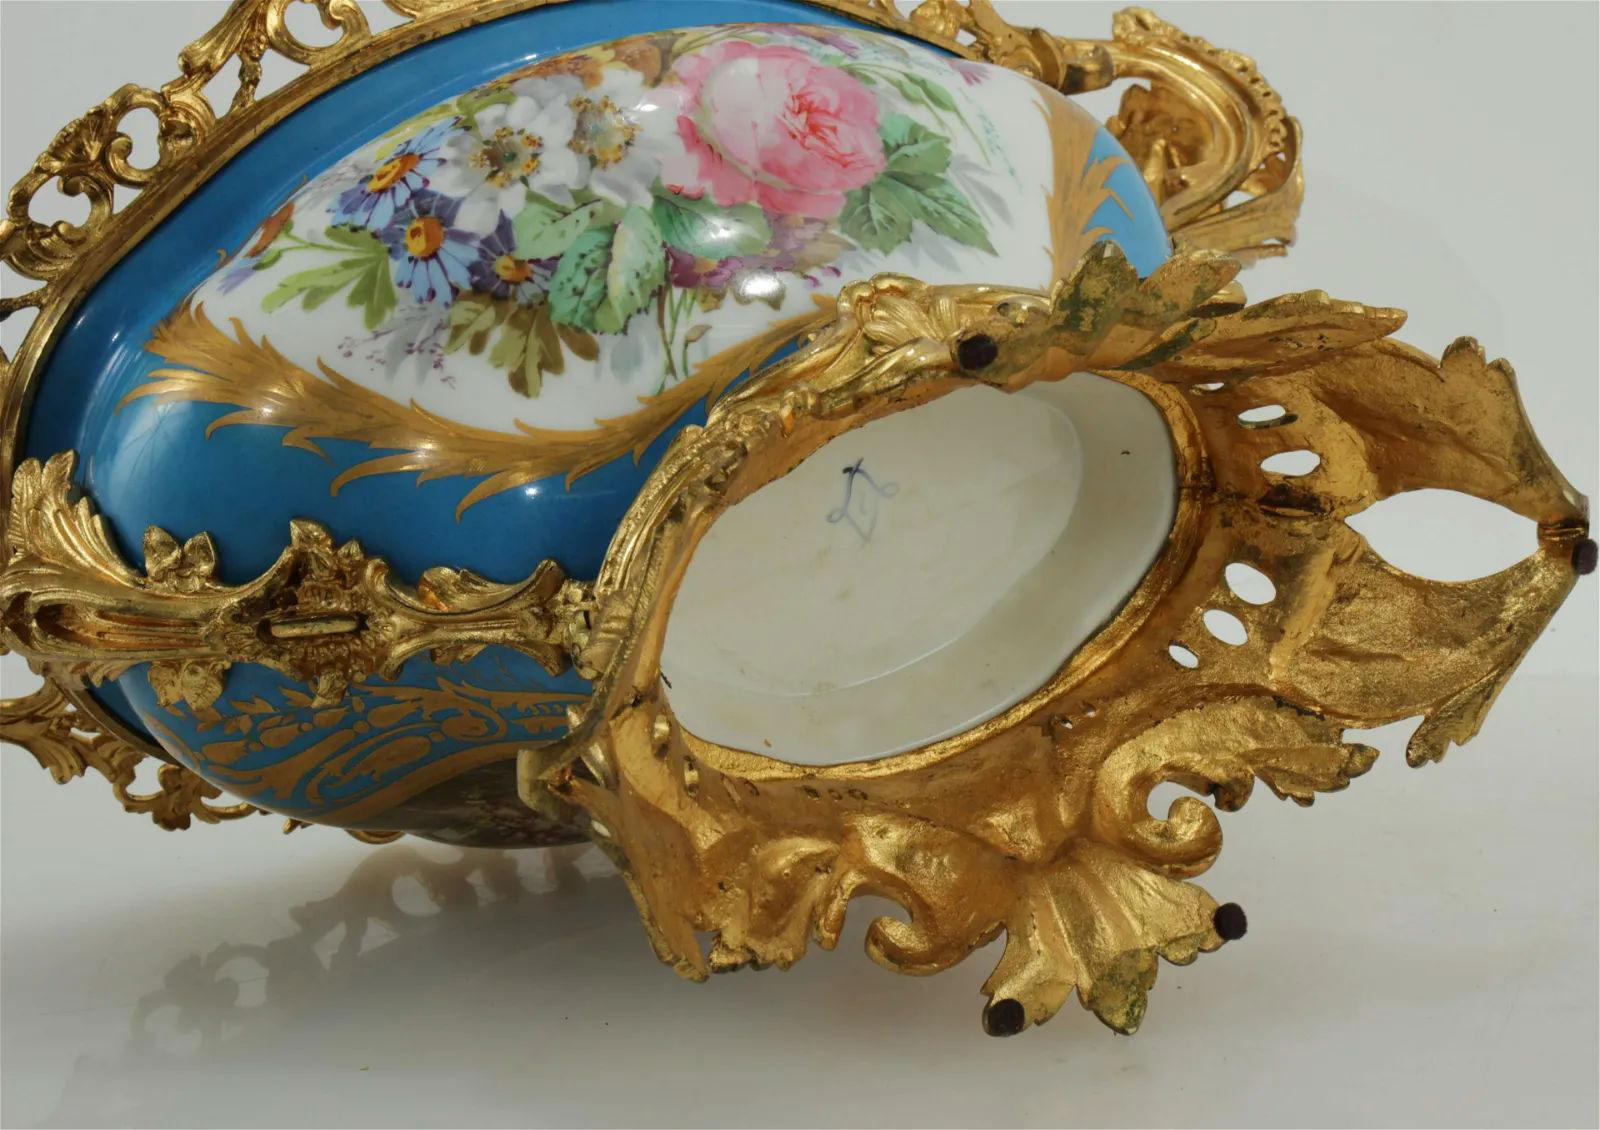 Rococo Revival French 19 Century Rococo Sevres Style Gilt Bronze Mounted Porcelain Centerpiece For Sale